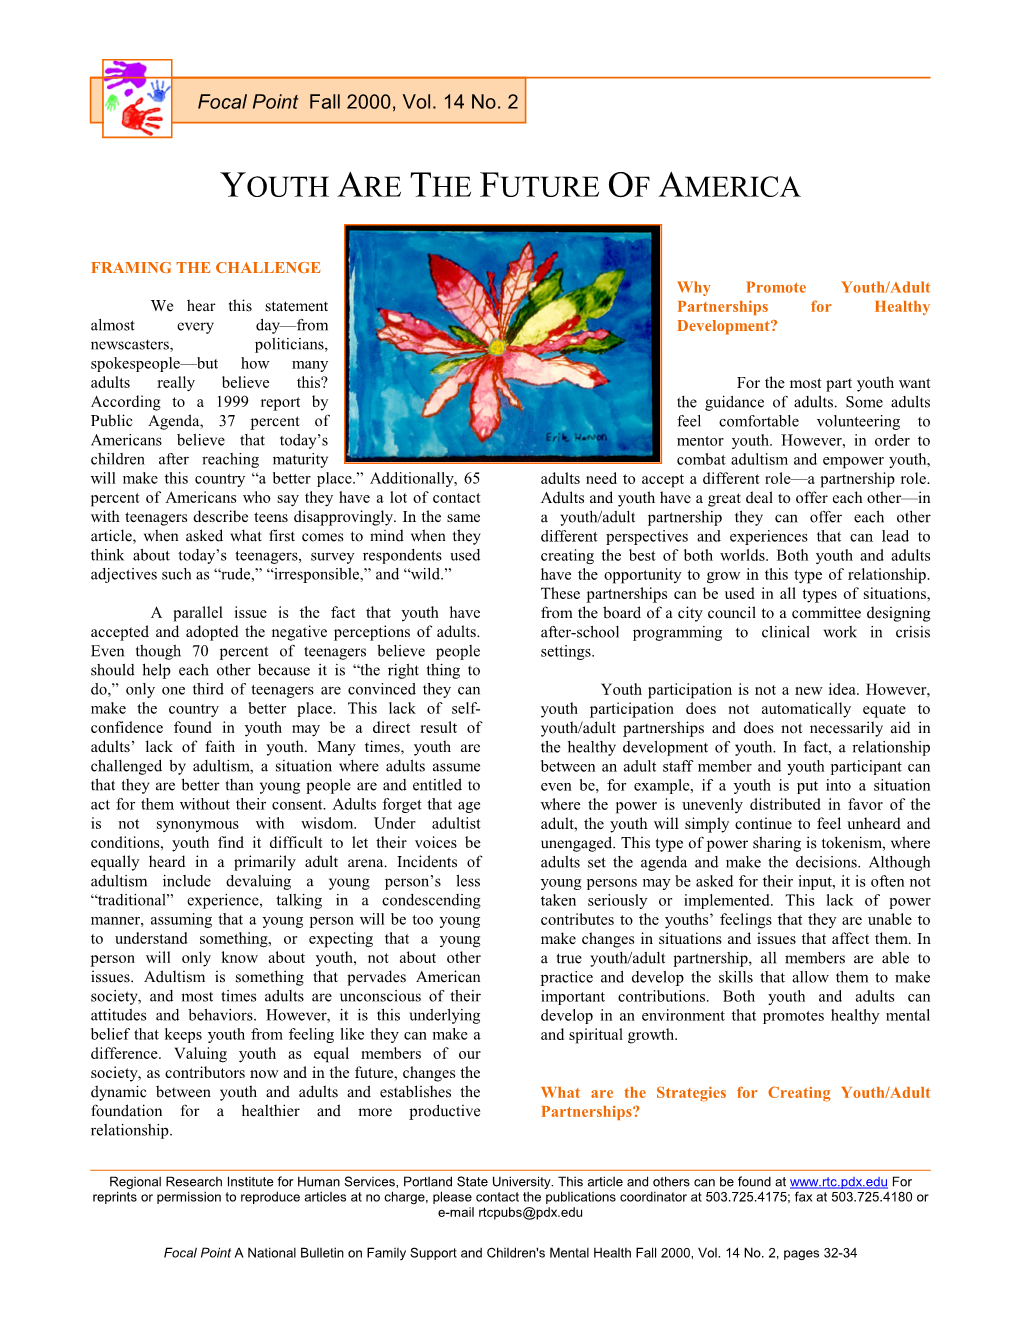 Youth Are the Future of America